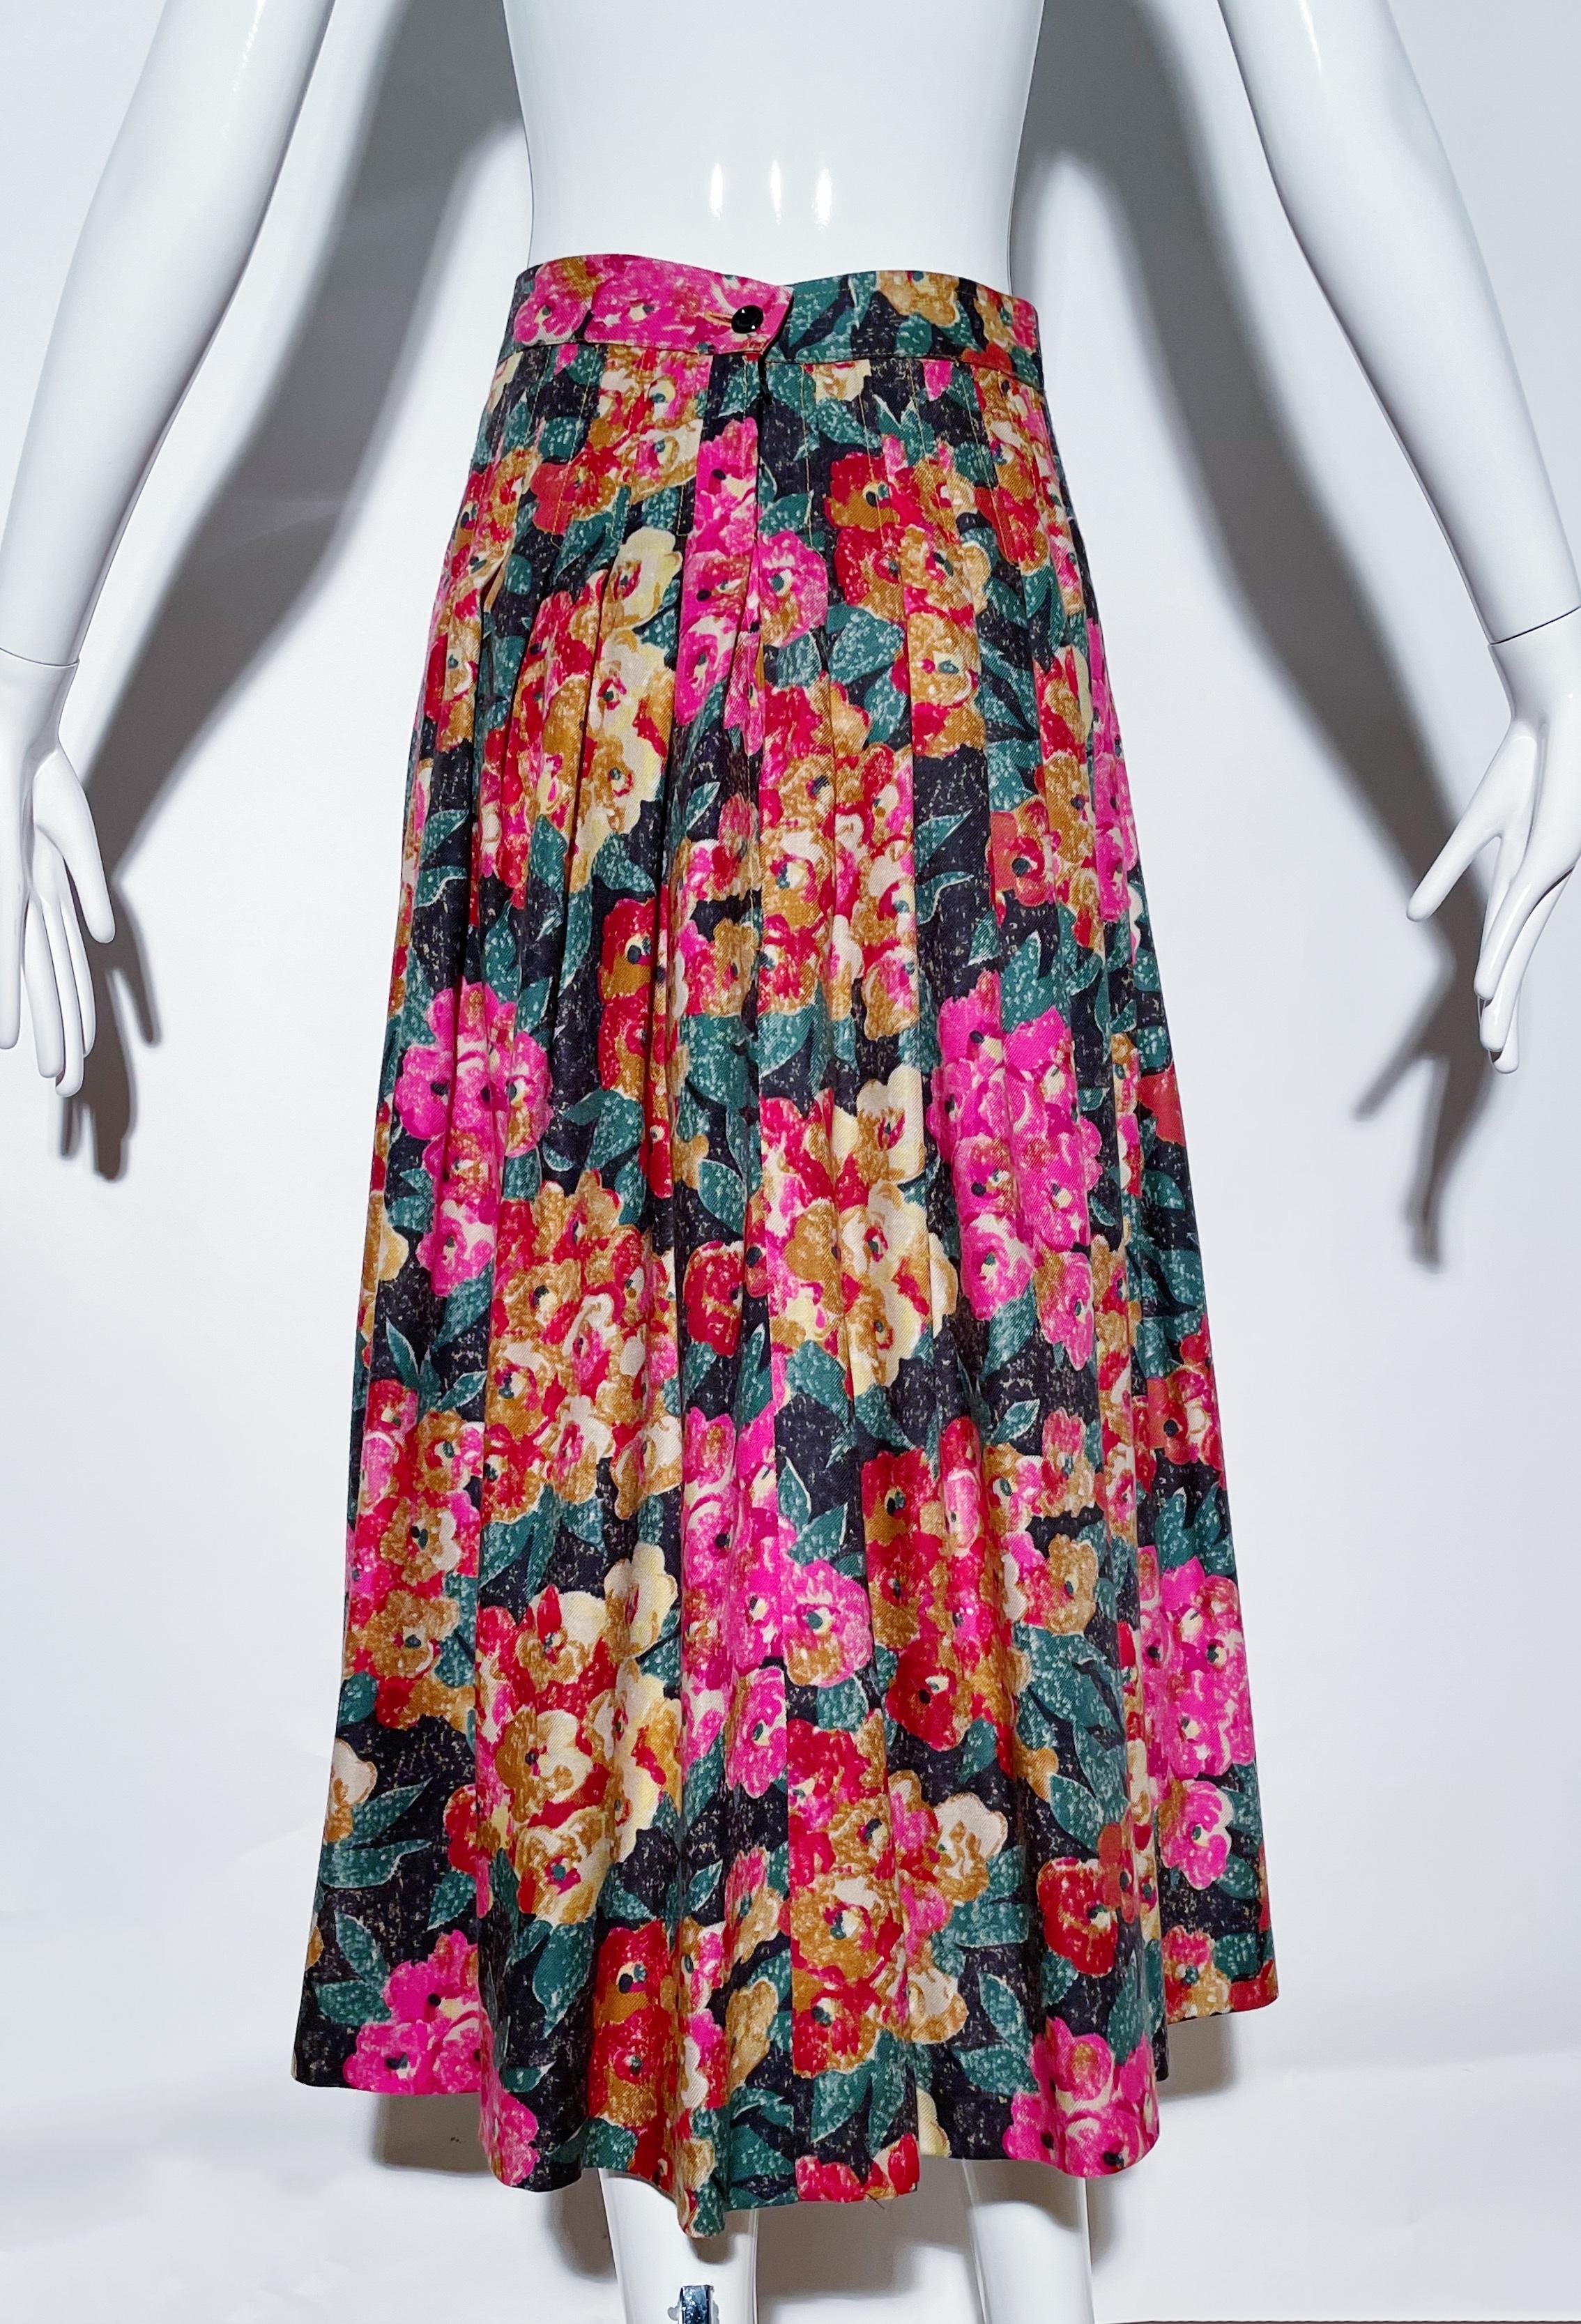 Pink toned floral skirt. Pleated. Rear zipper closure. Made in Italy. 
*Condition: Excellent vintage condition. No visible flaws.

Measurements Taken Laying Flat (inches)—
Waist: 28 in.
Hip: 40 in.
Length: 32 in.
Marked size: 12 US, best fit for an